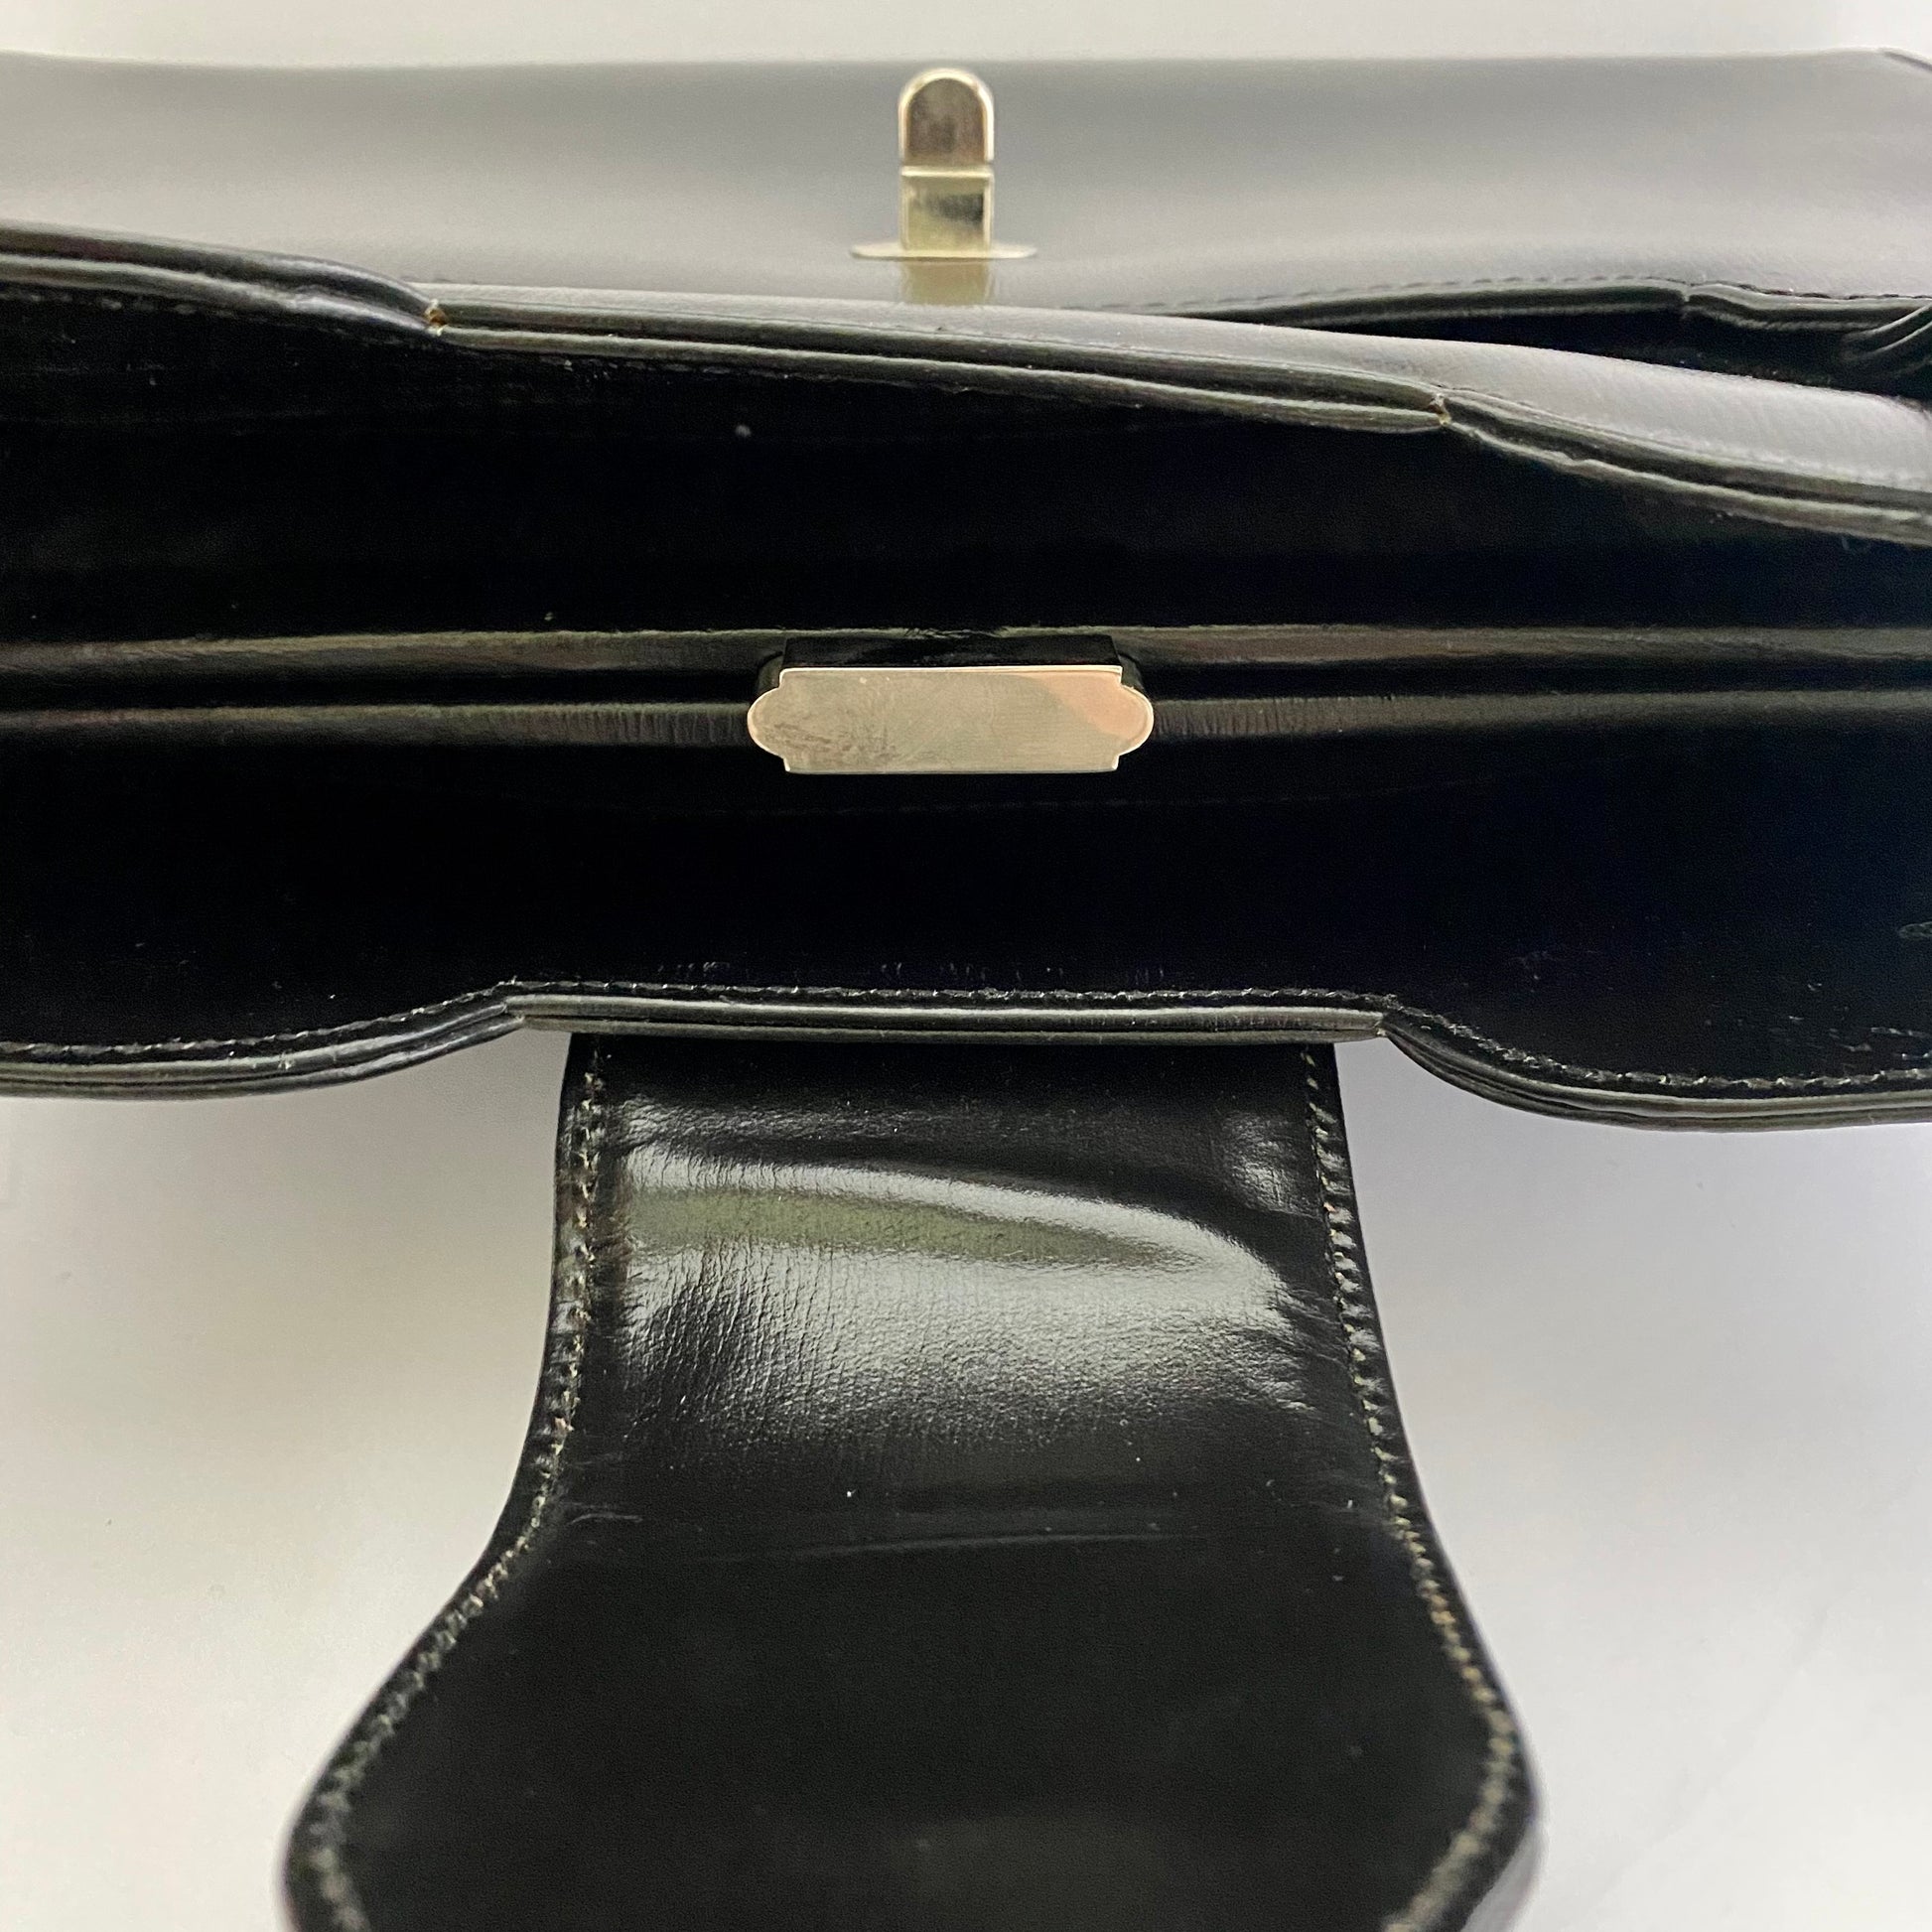 American Vintage, Bags, Vintage French 95s 1960s Dofan Black Leather Purse  Made In France